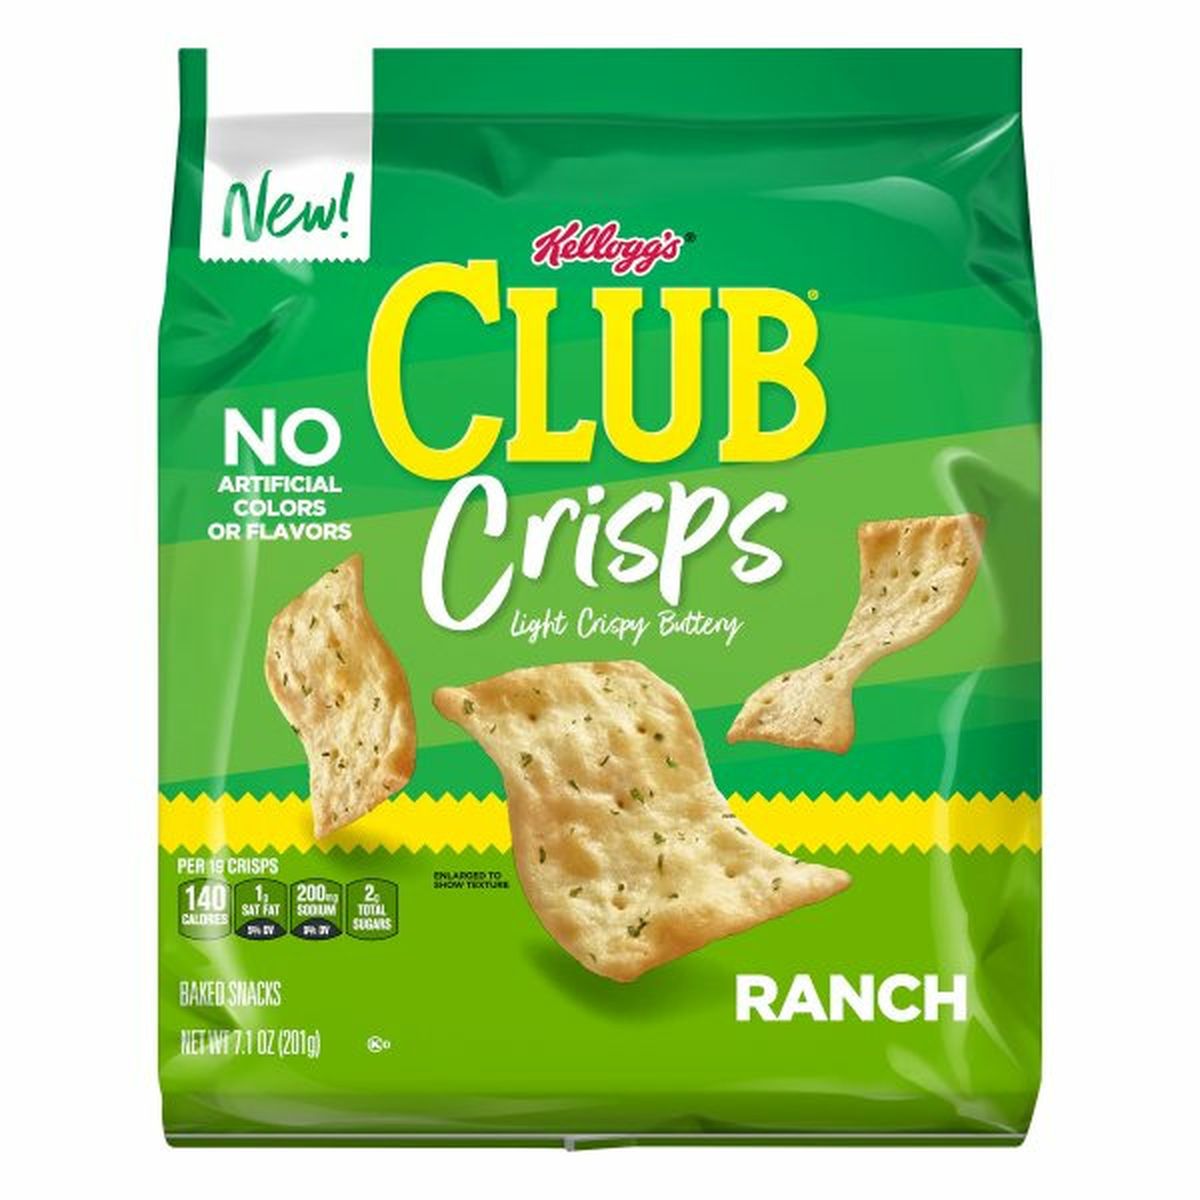 Calories in Kellogg's Club Crisps Baked Snacks, Ranch